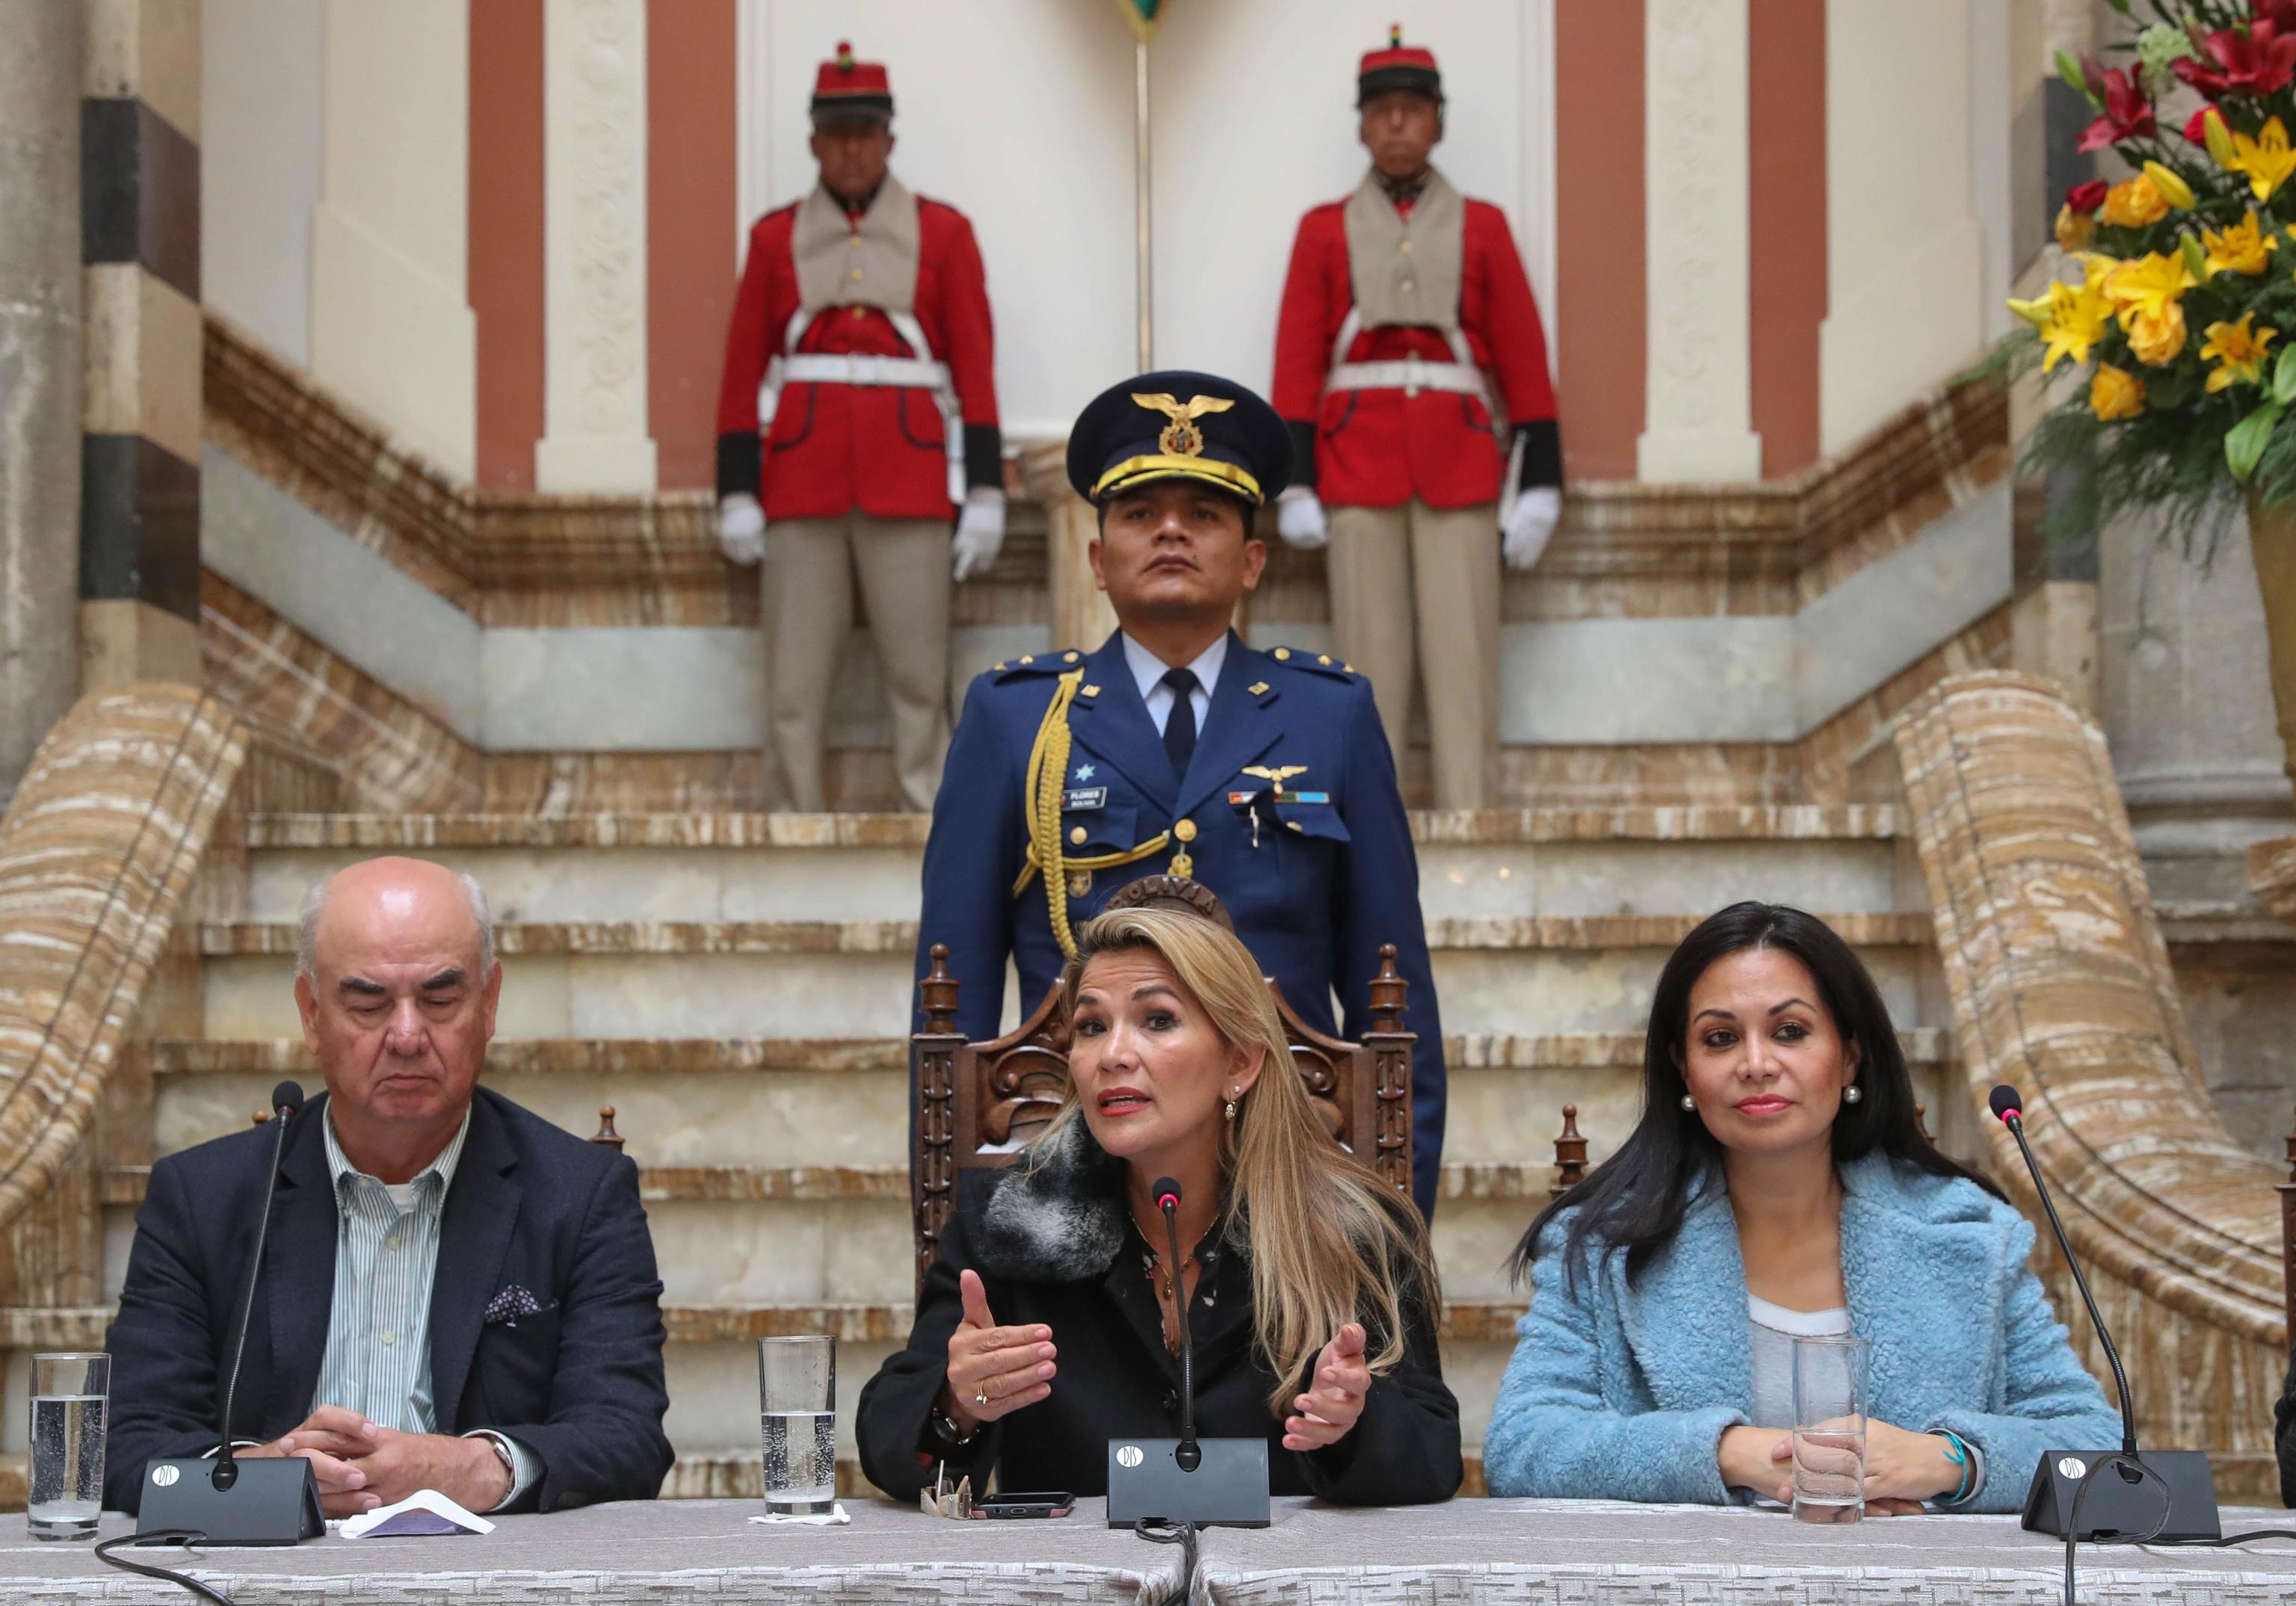 epa07999521 Interim President of Bolivia, Jeanine Anez (C) speaks along with Ministers of Economy, Jose Luis Parada (L) and Minister of Communication, Roxana Lizarraga (R) at a press conference at Government Palace in La Paz, Bolivia, 15 November 2019. Anez announced that this day she hopes to start the process for new elections after the failed elections that led to the resignation of Evo Morales.  EPA/RODRIGO SURA